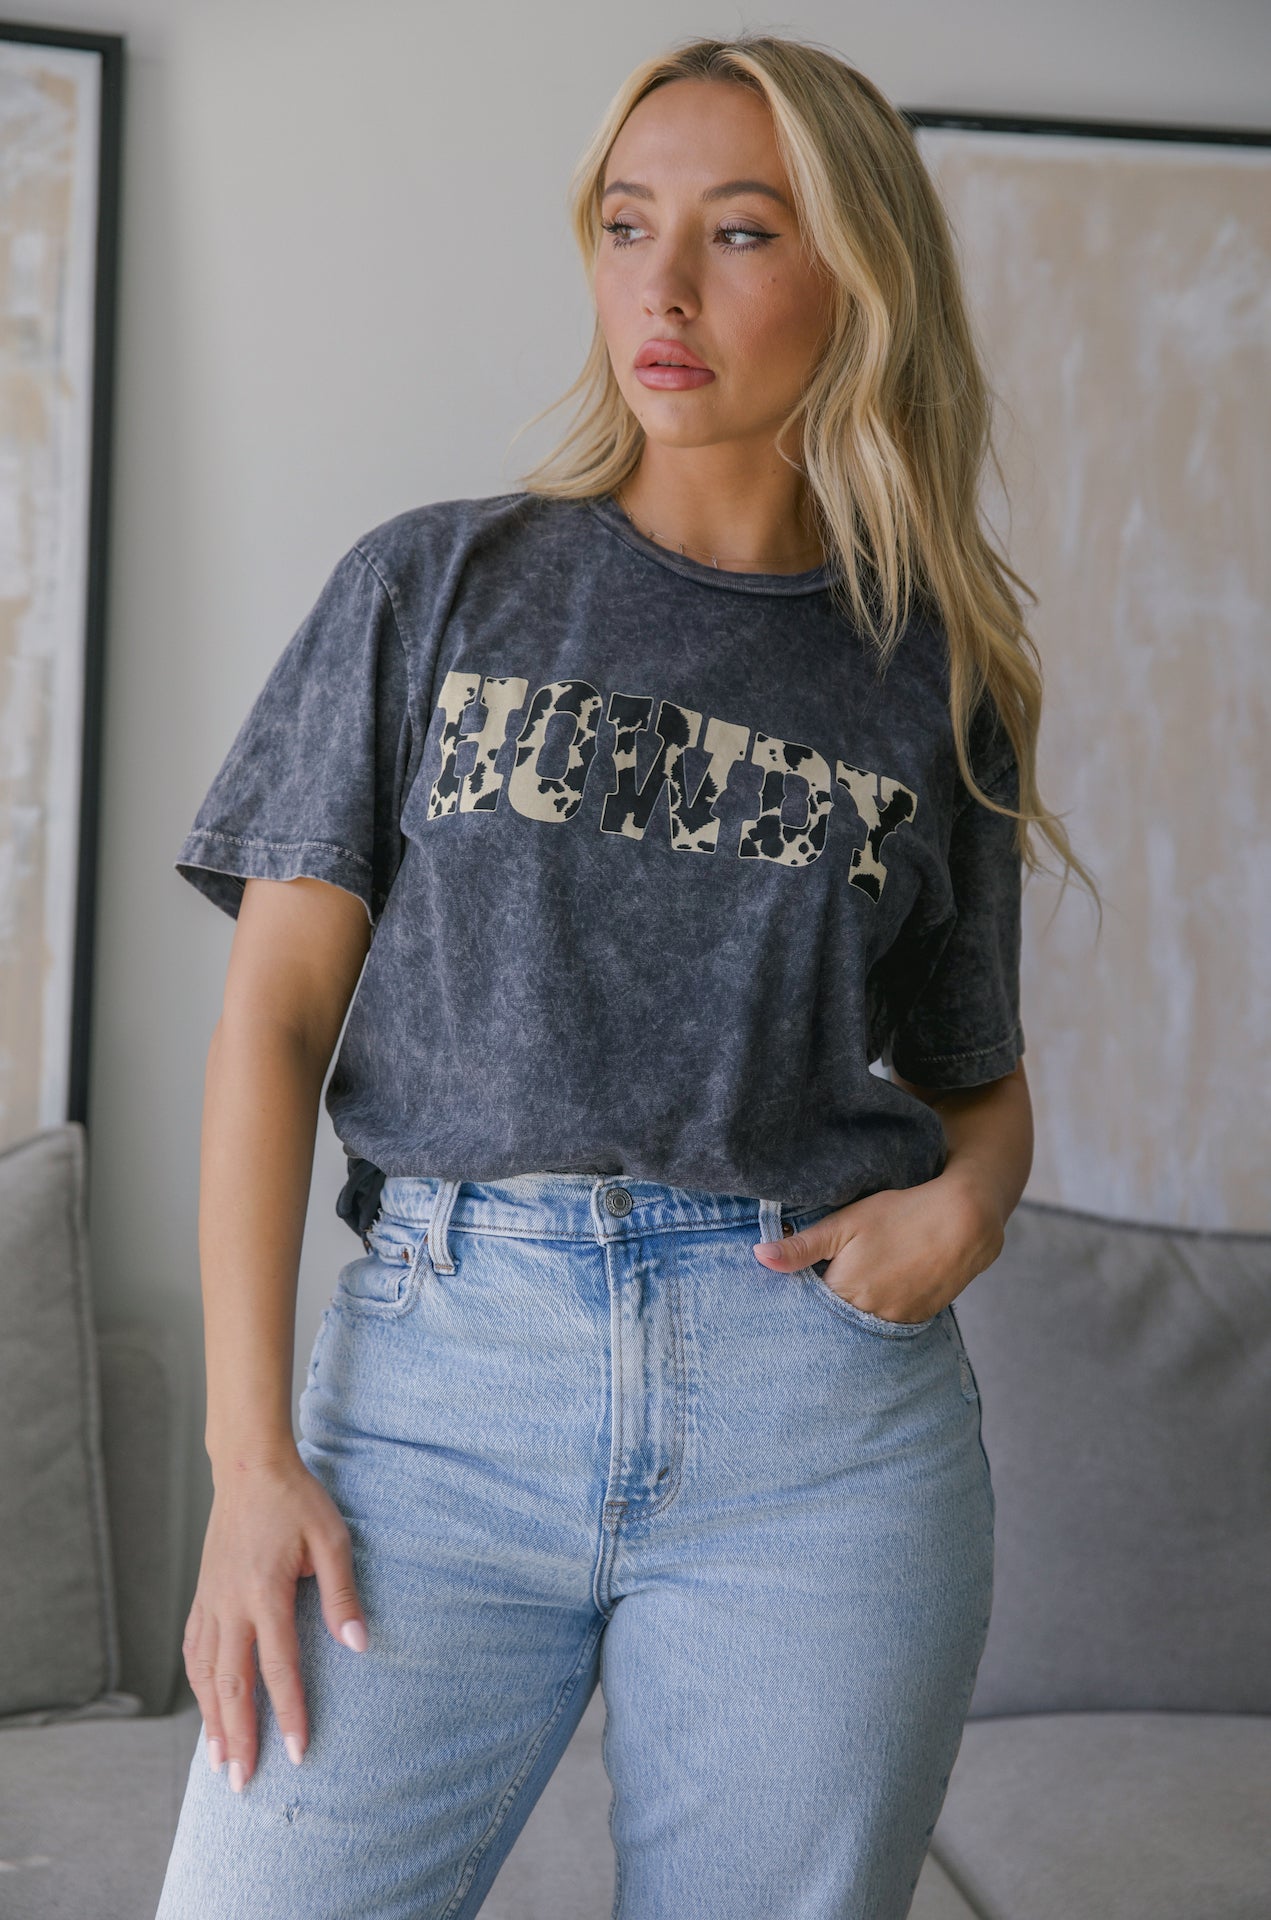 howdy cow print graphic tee on grey mineral wash tee